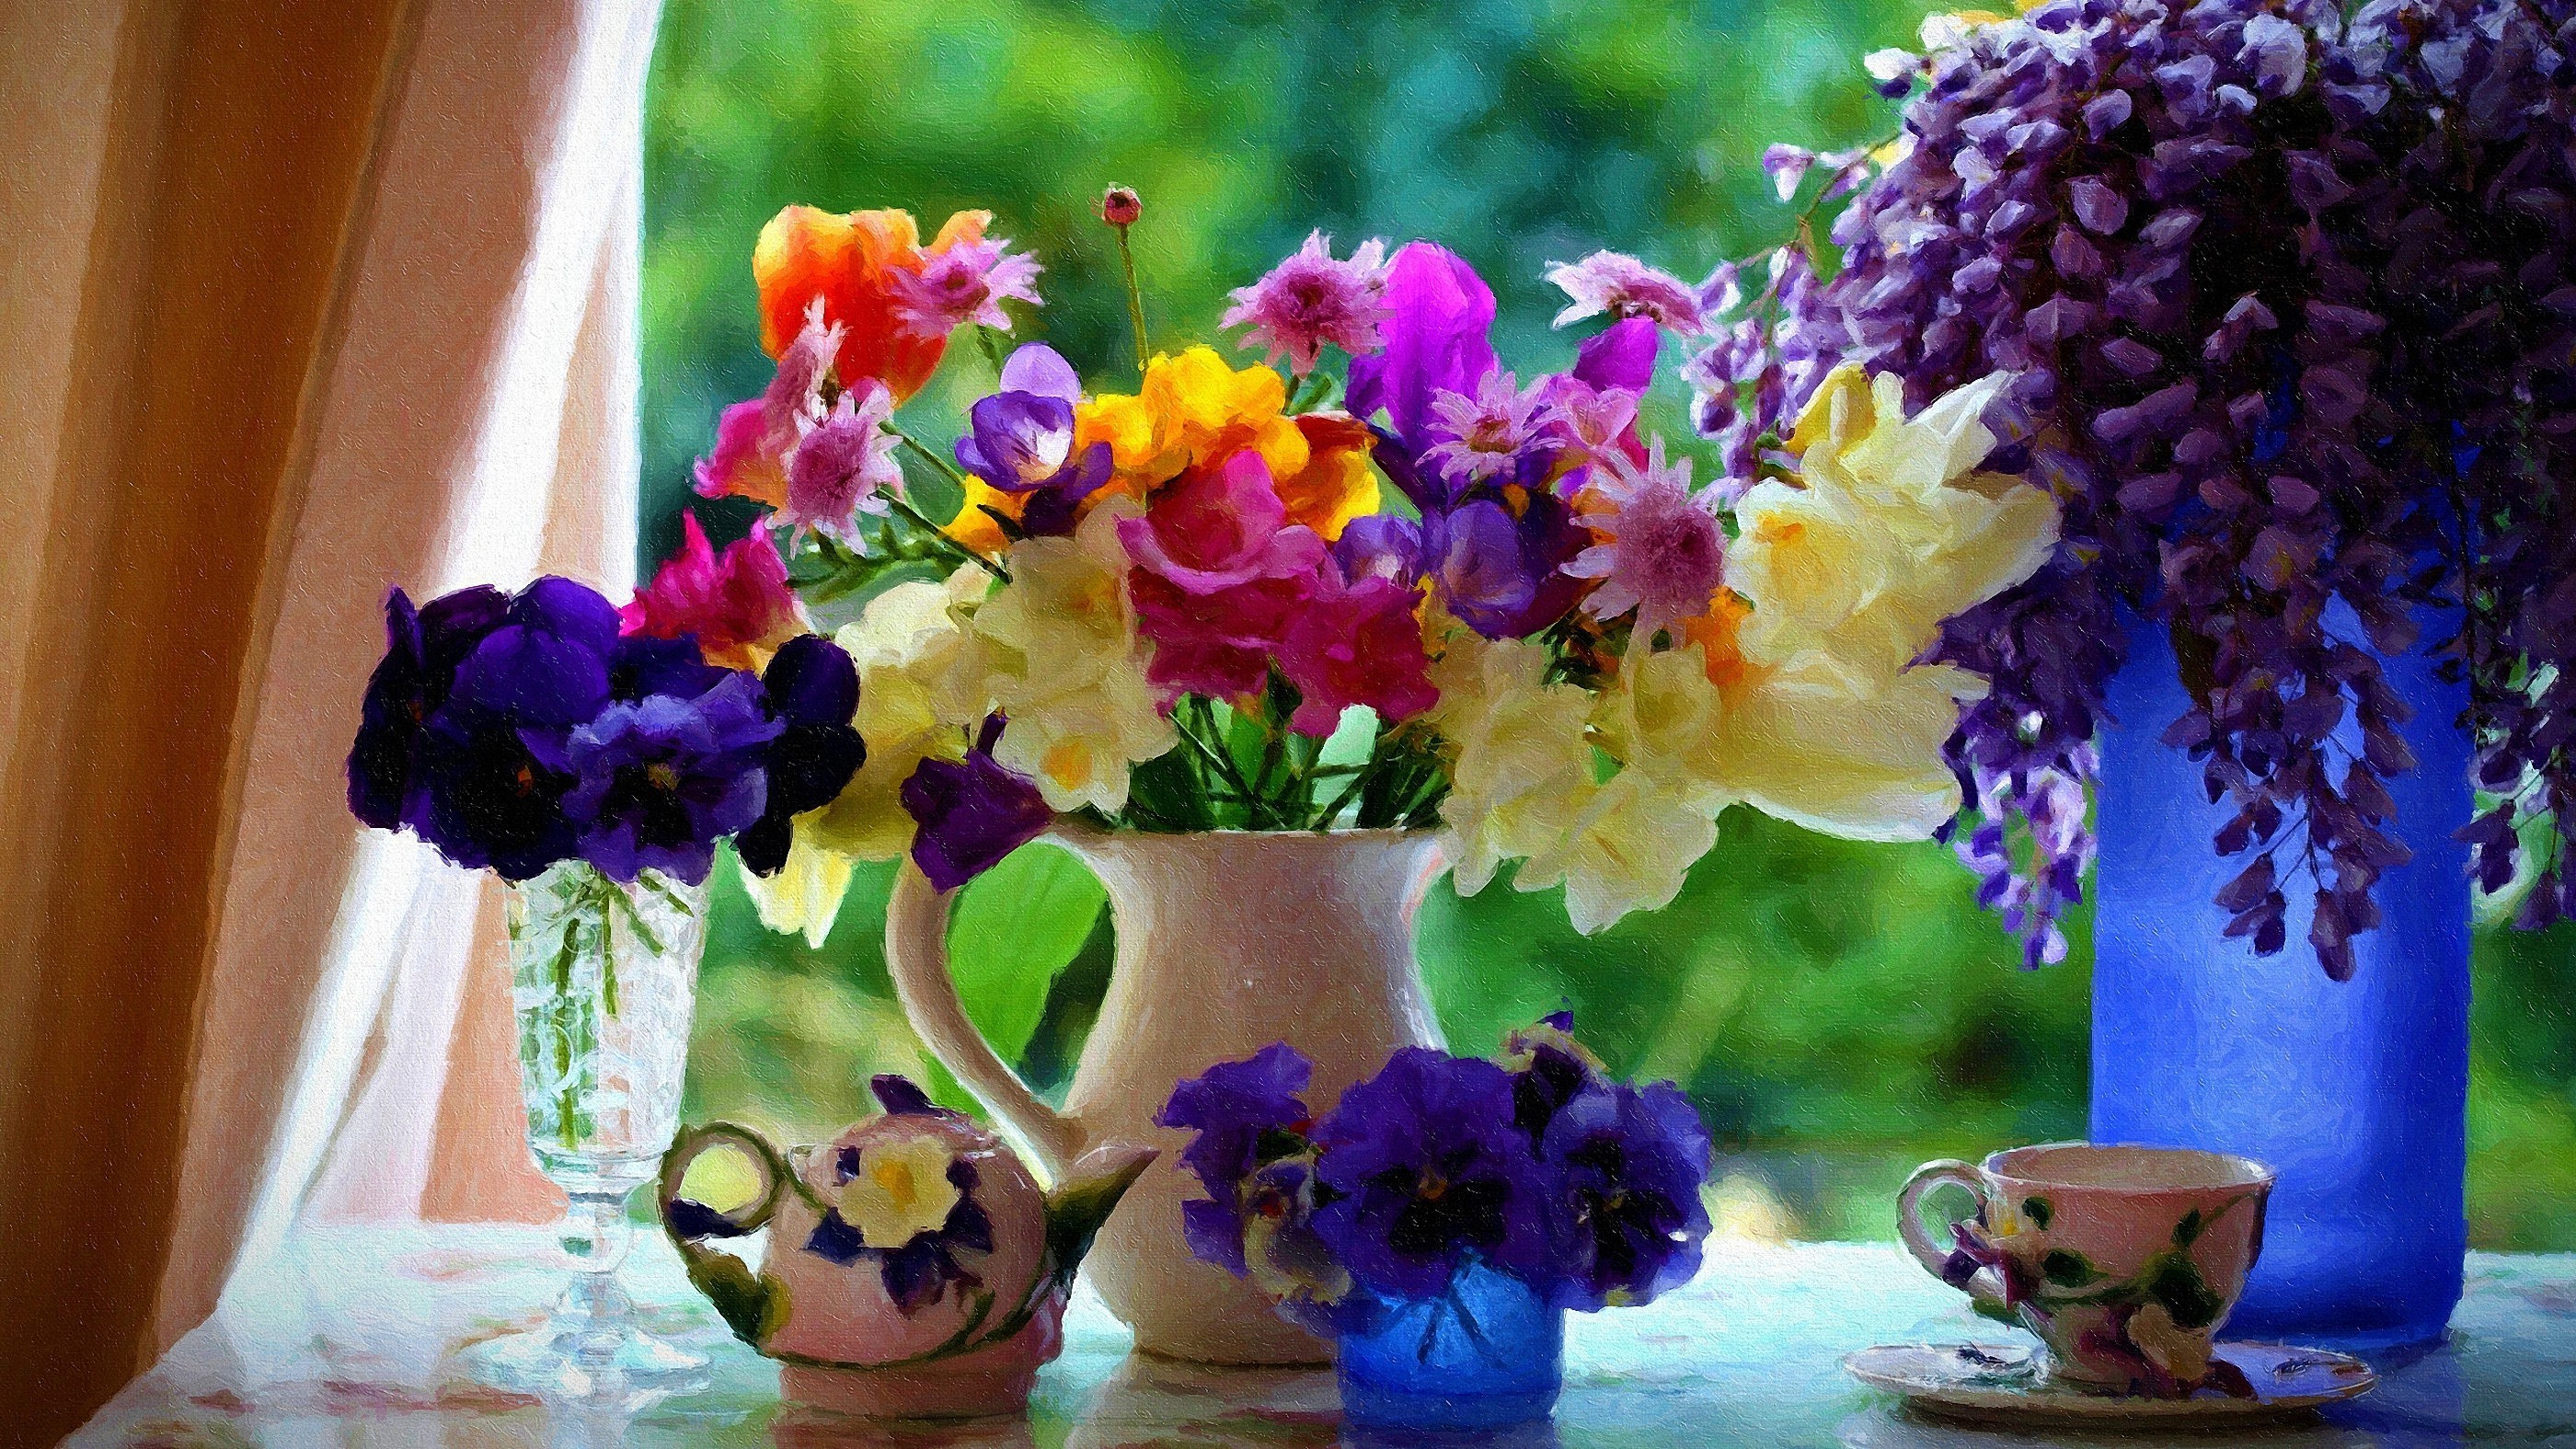 flowers, Vases, Pansies, Bouquets, Cup, Painting Wallpaper